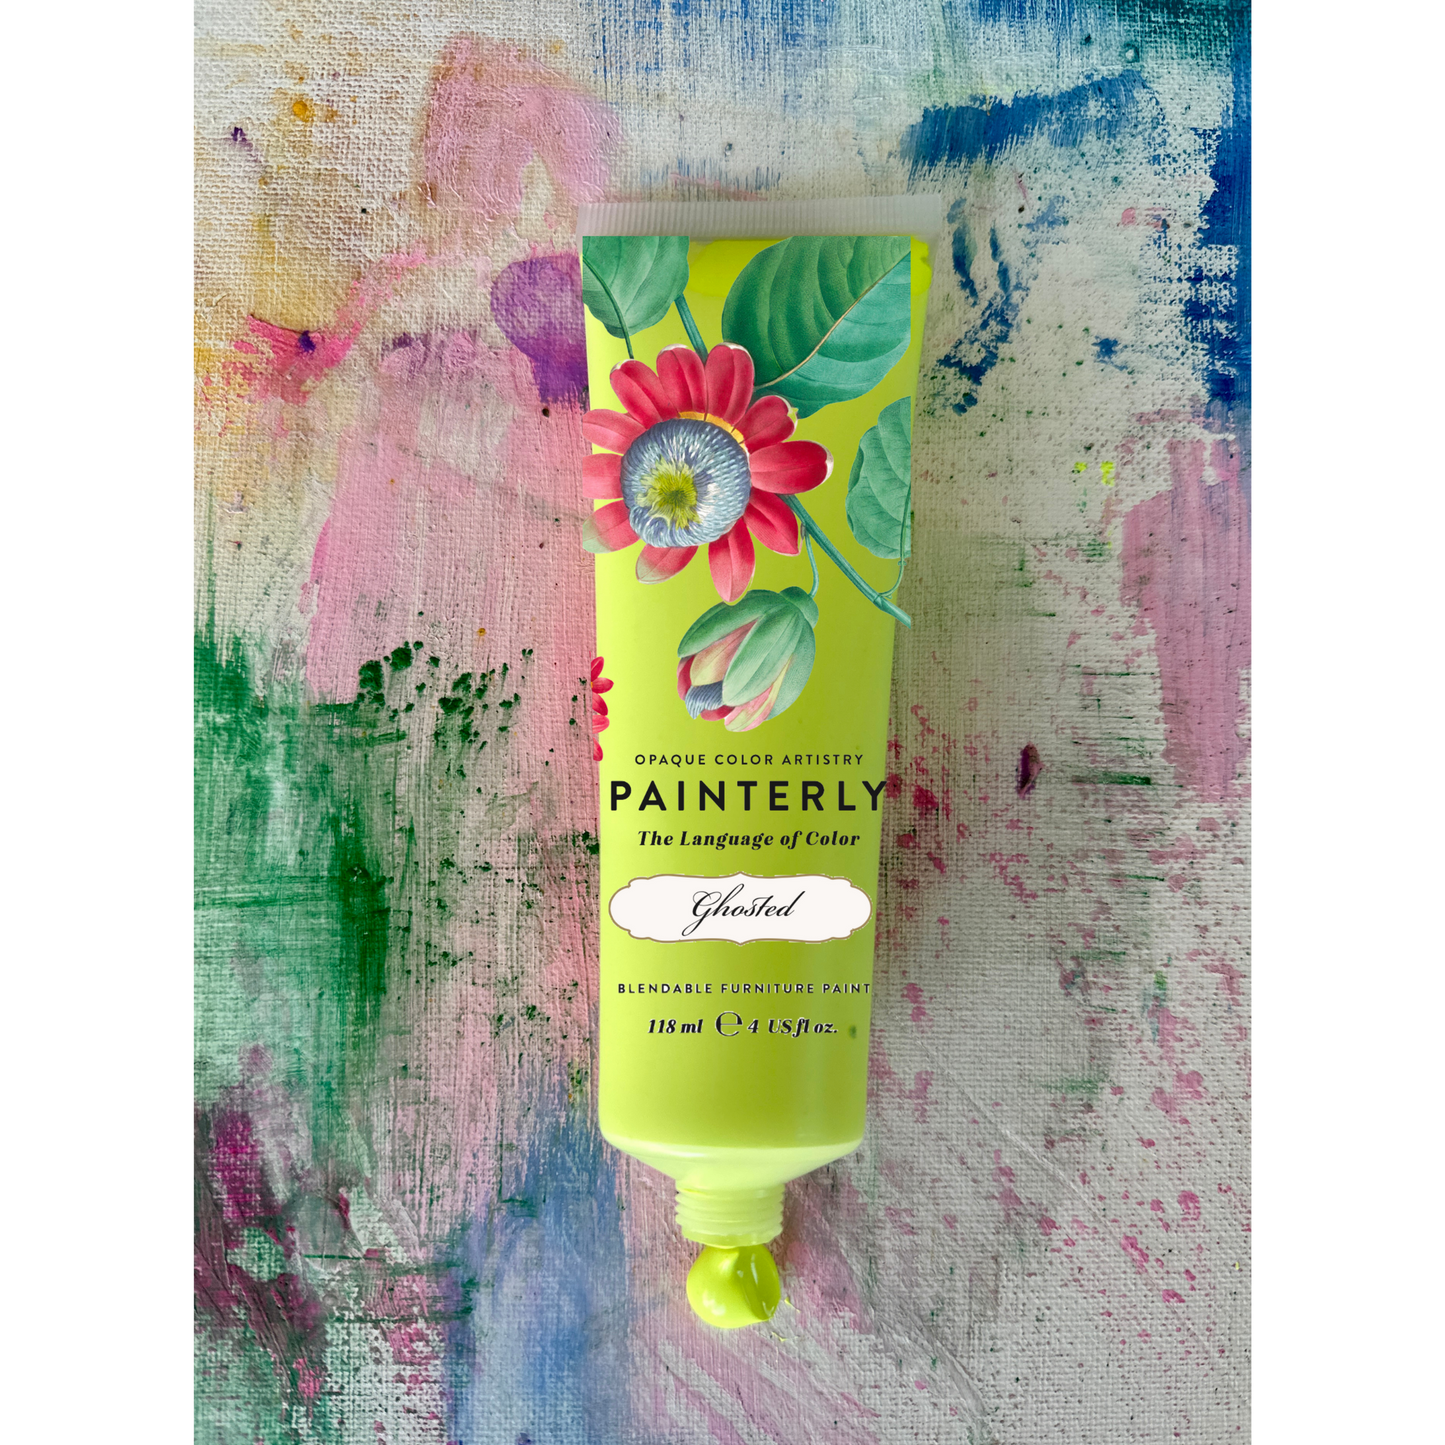 Painterly Furniture Artist Paint - PREORDER ships approx. 11/01